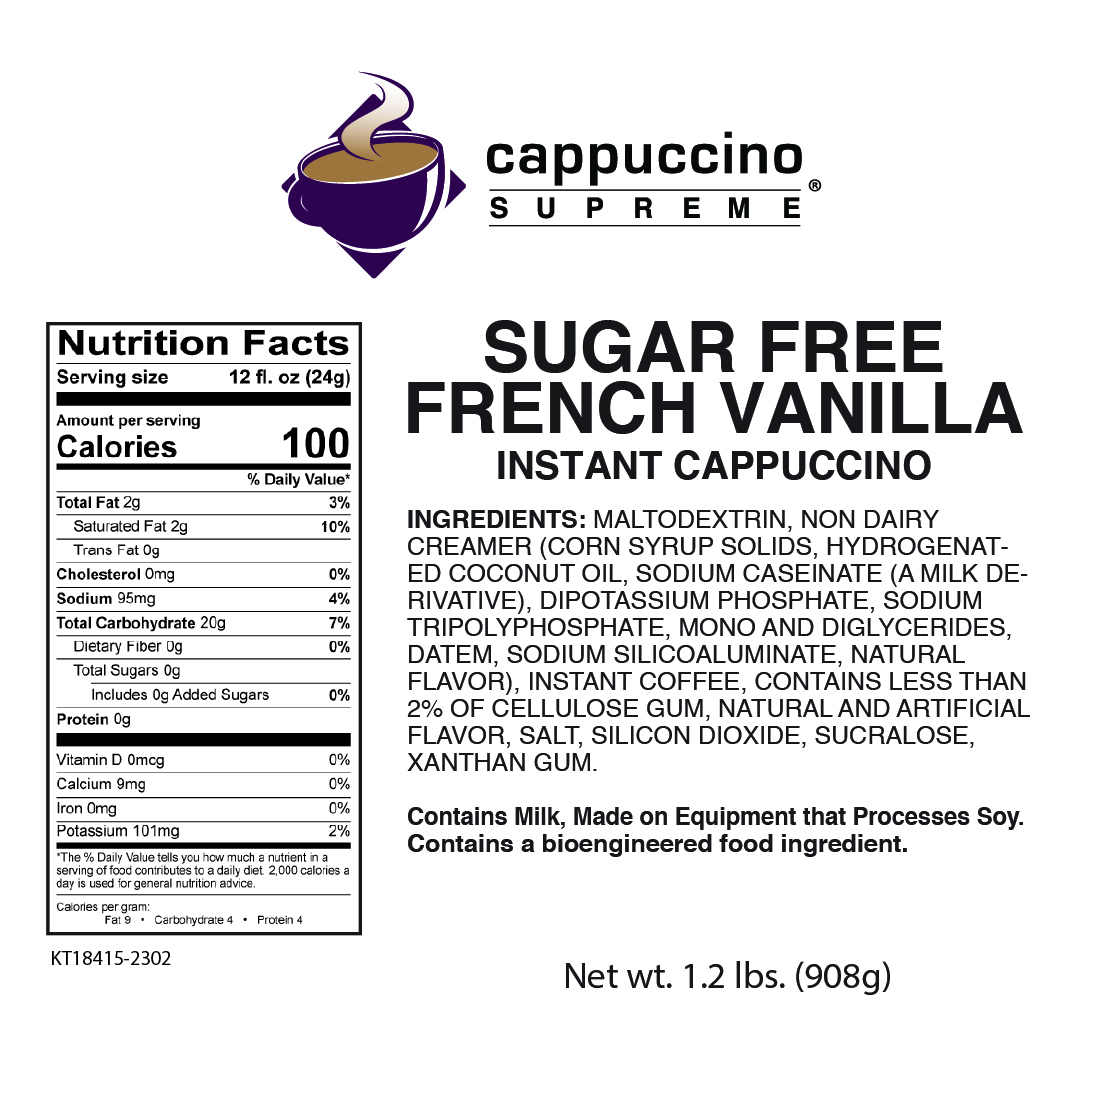 sugar free French vanilla Cappuccino Supreme nutrition and ingredients